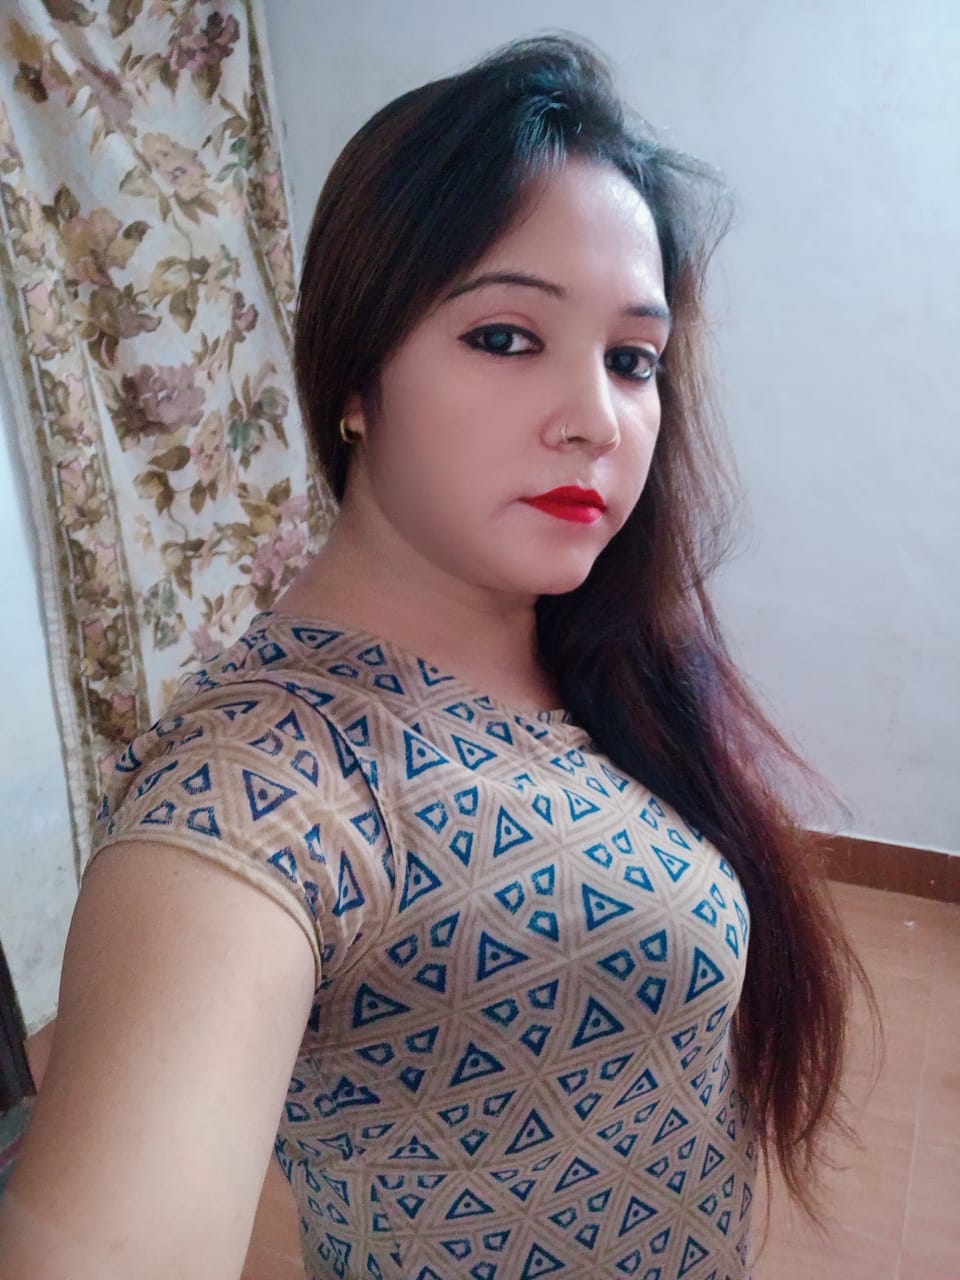 Call girl in Sultanpur 